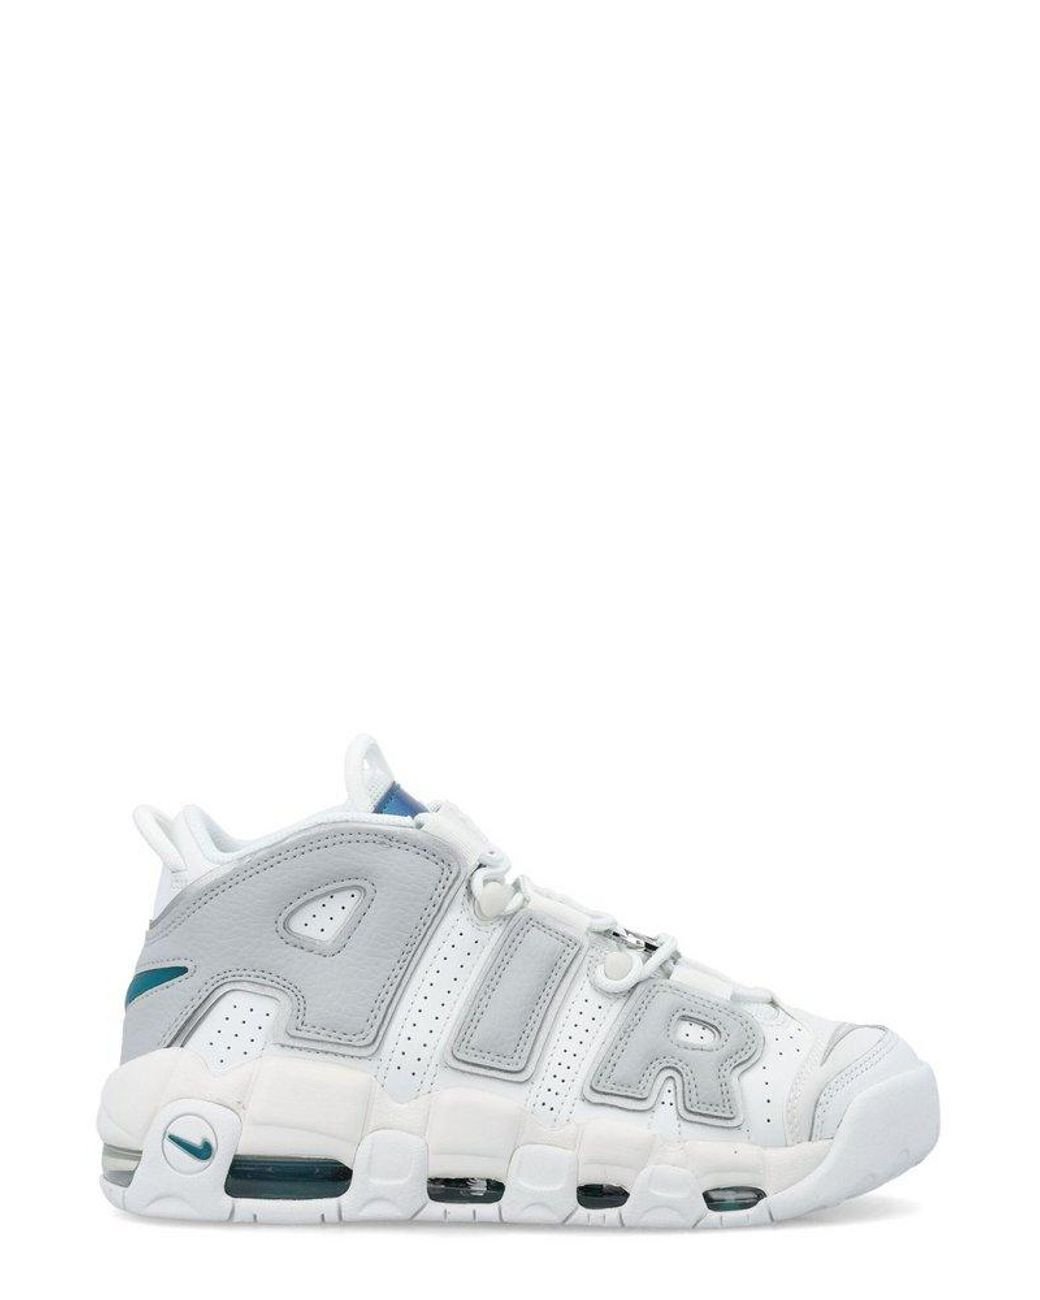 Nike Air More Uptempo Shoes White | Lyst